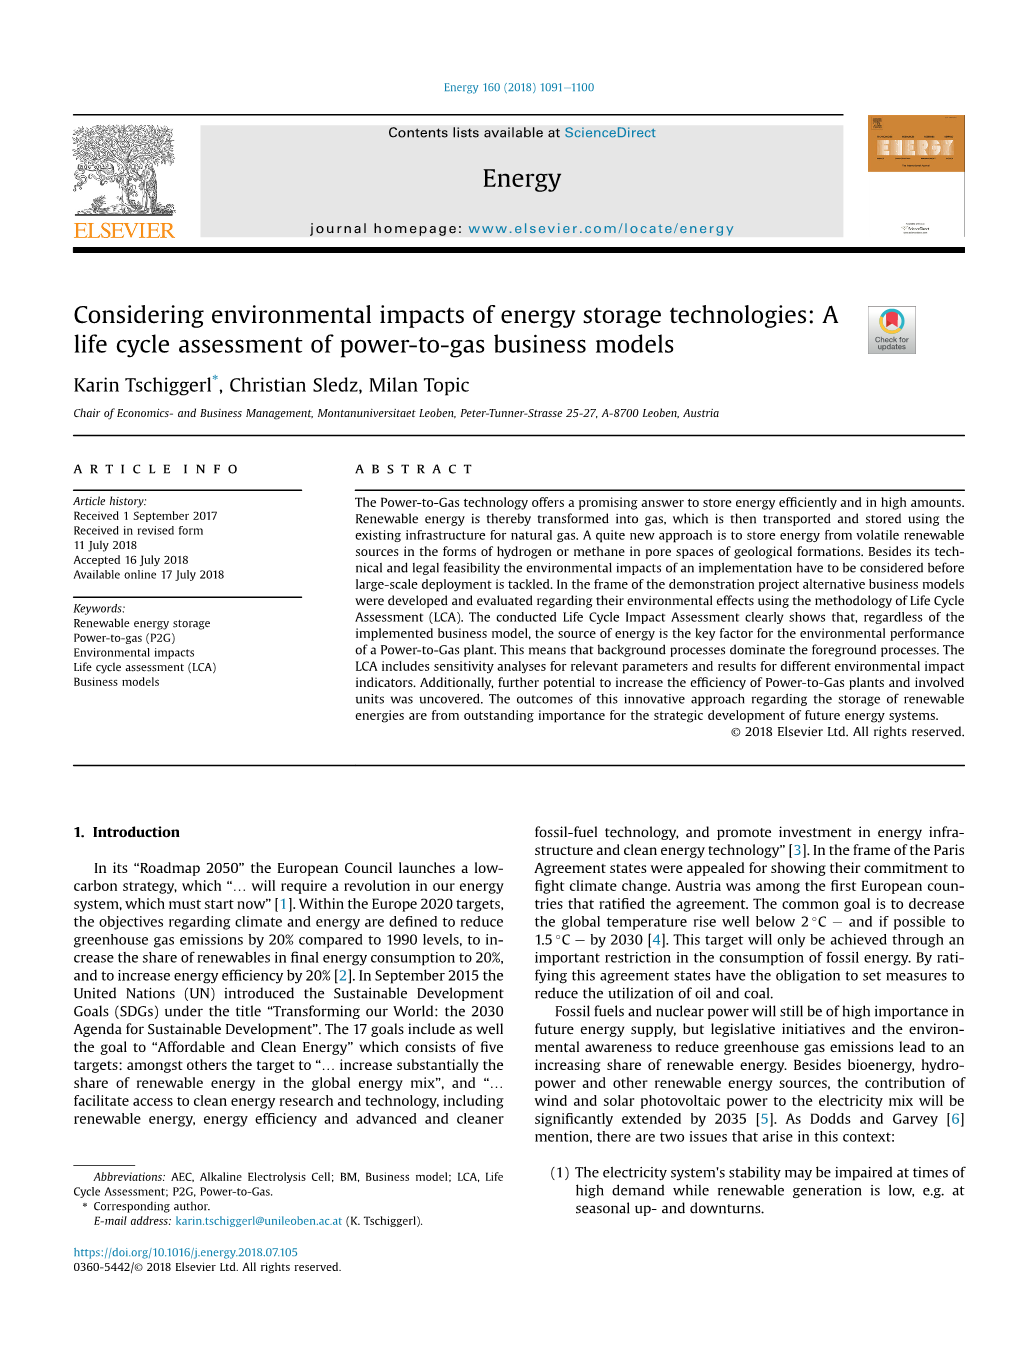 Considering Environmental Impacts of Energy Storage Technologies: a Life Cycle Assessment of Power-To-Gas Business Models